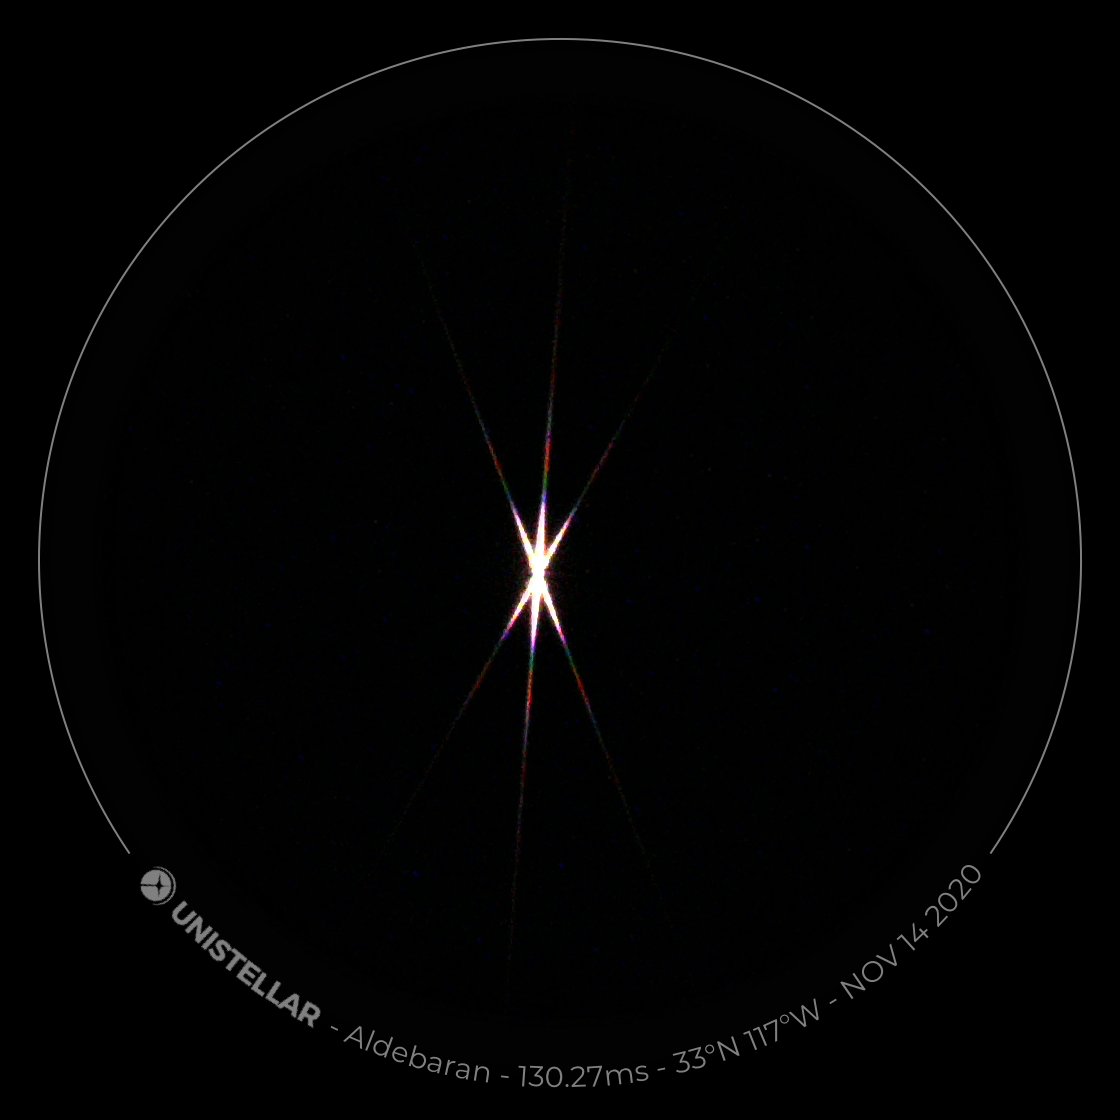 Focusing the telescope is very easy. There's a Bahtinov mask that is included as part of the dust cover. You simply point at a bright star and then with the mask on adjust the focus until the vertical line goes through the X. Super easy.